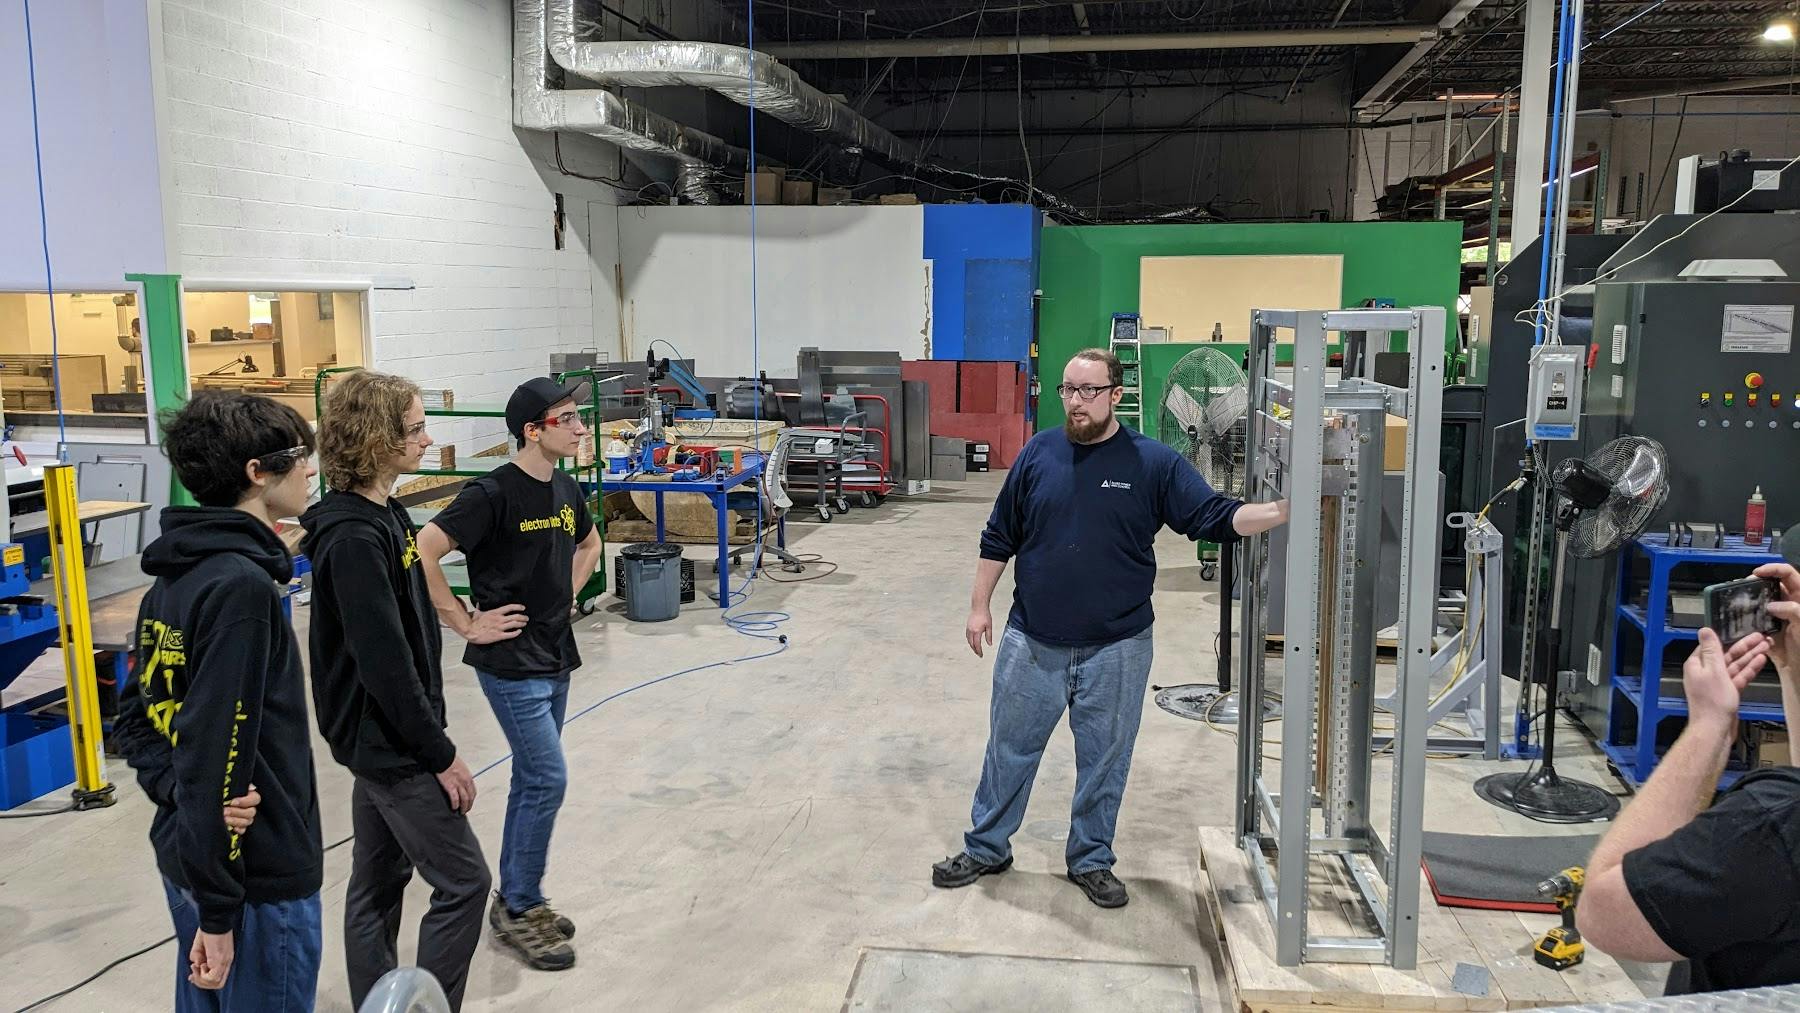 We visited and learned about Allied Power and Control, one of our sponsors and a place where one of our alumni works. They make machined parts for us!